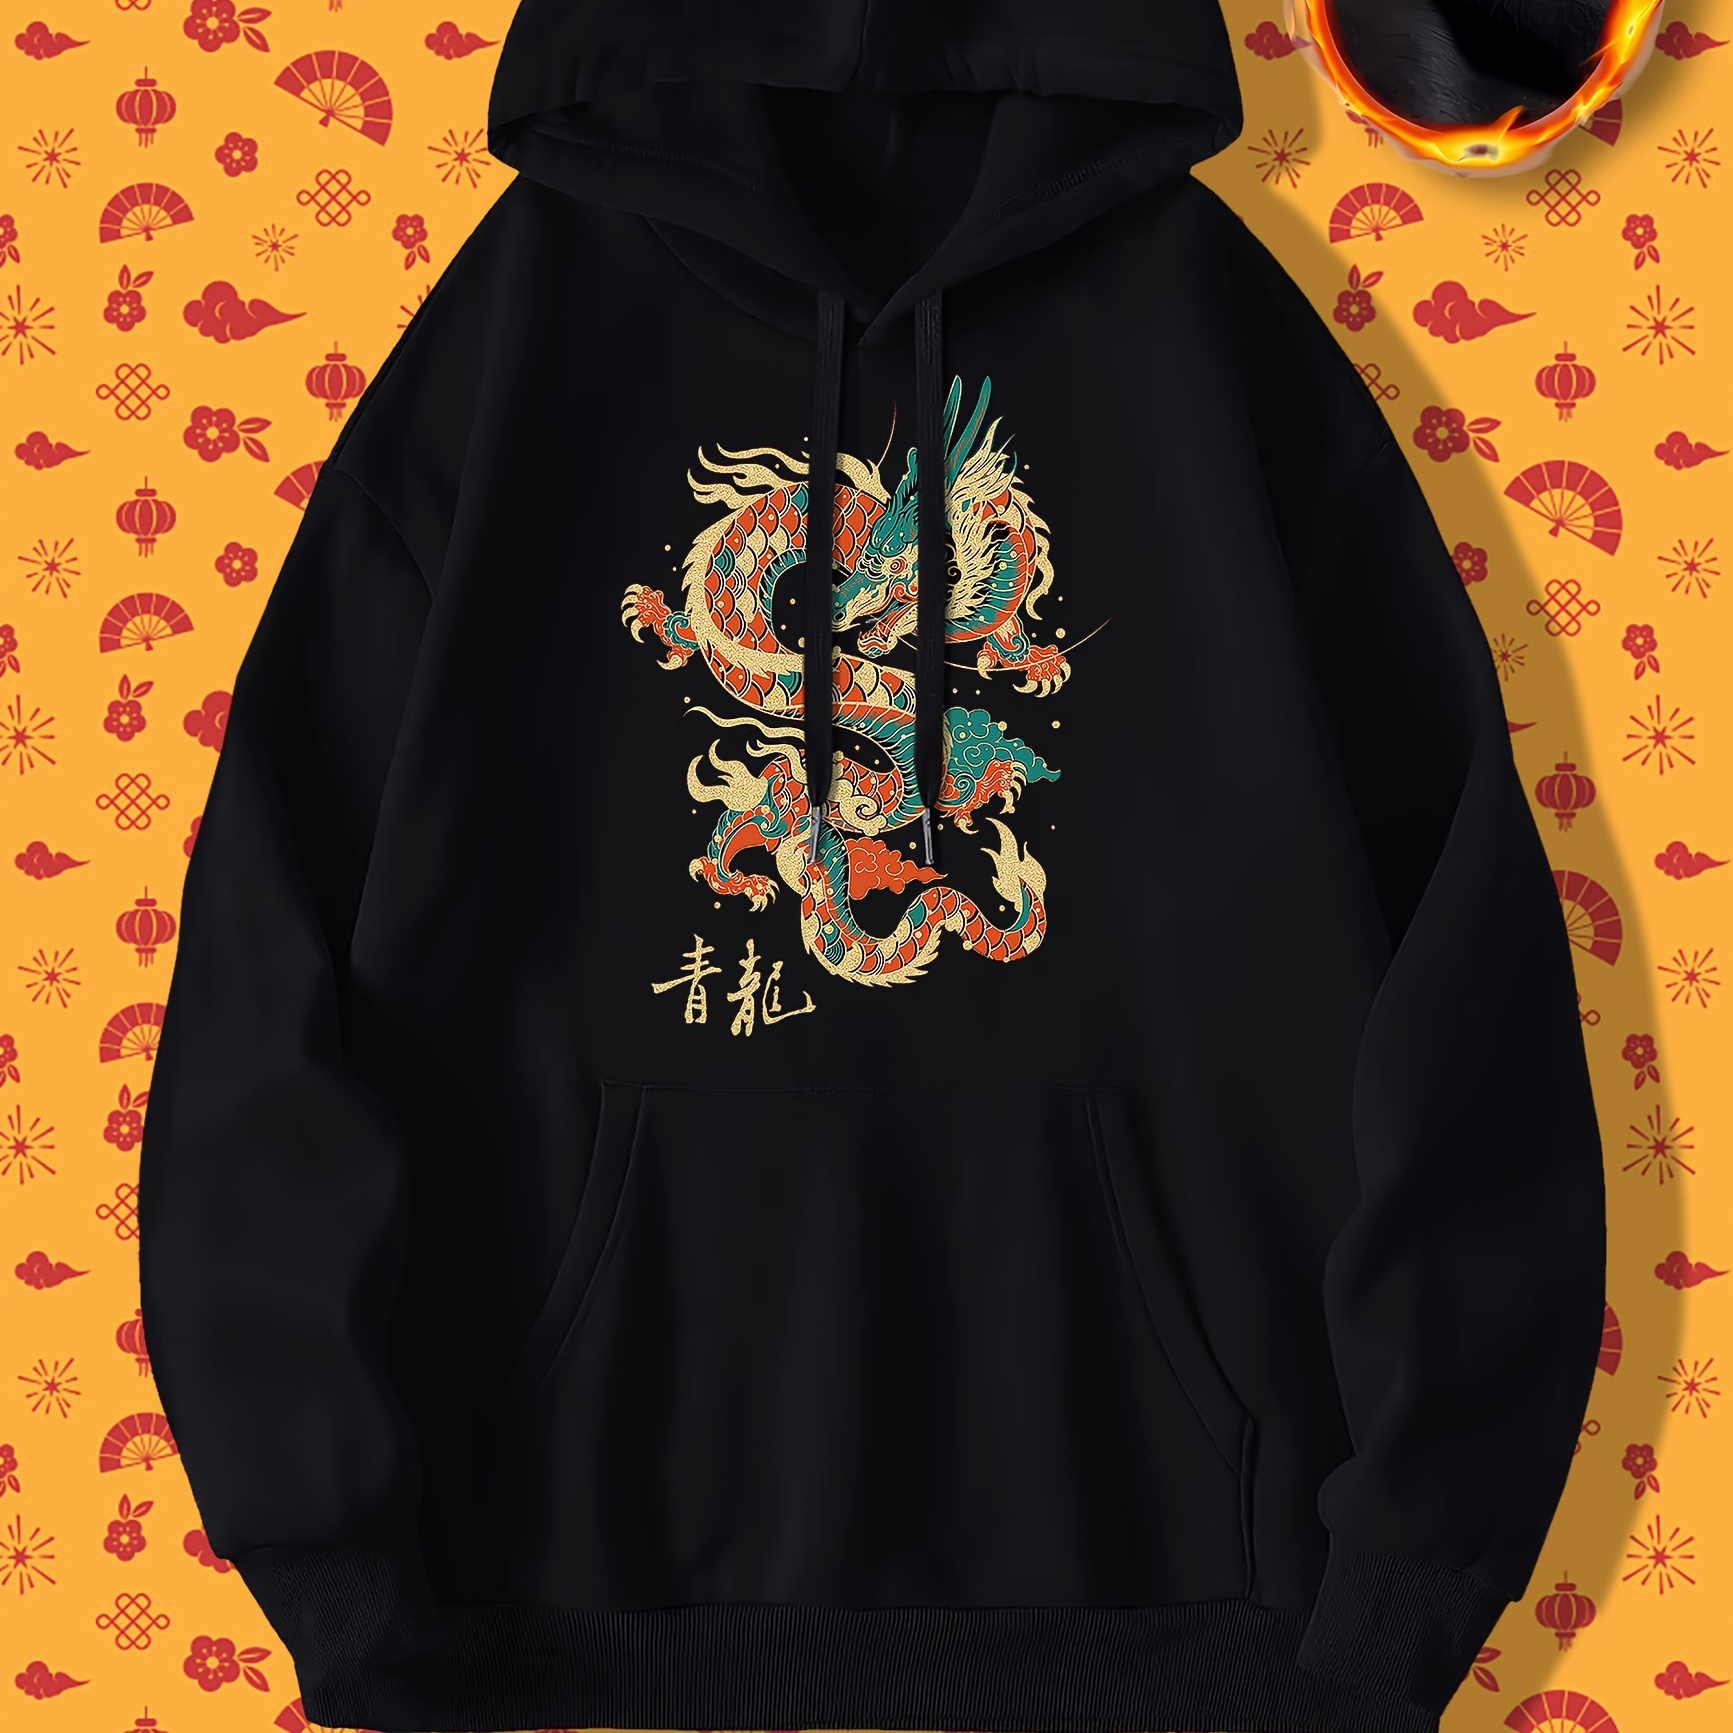 

Chinese Characters And Dragon Graphic Print Hoodie With Fleece, Men's Creative Design Hooded Pullover, Warm Long Sleeve Sweatshirt For Men With Kangaroo Pocket For Fall And Winter, As Gifts